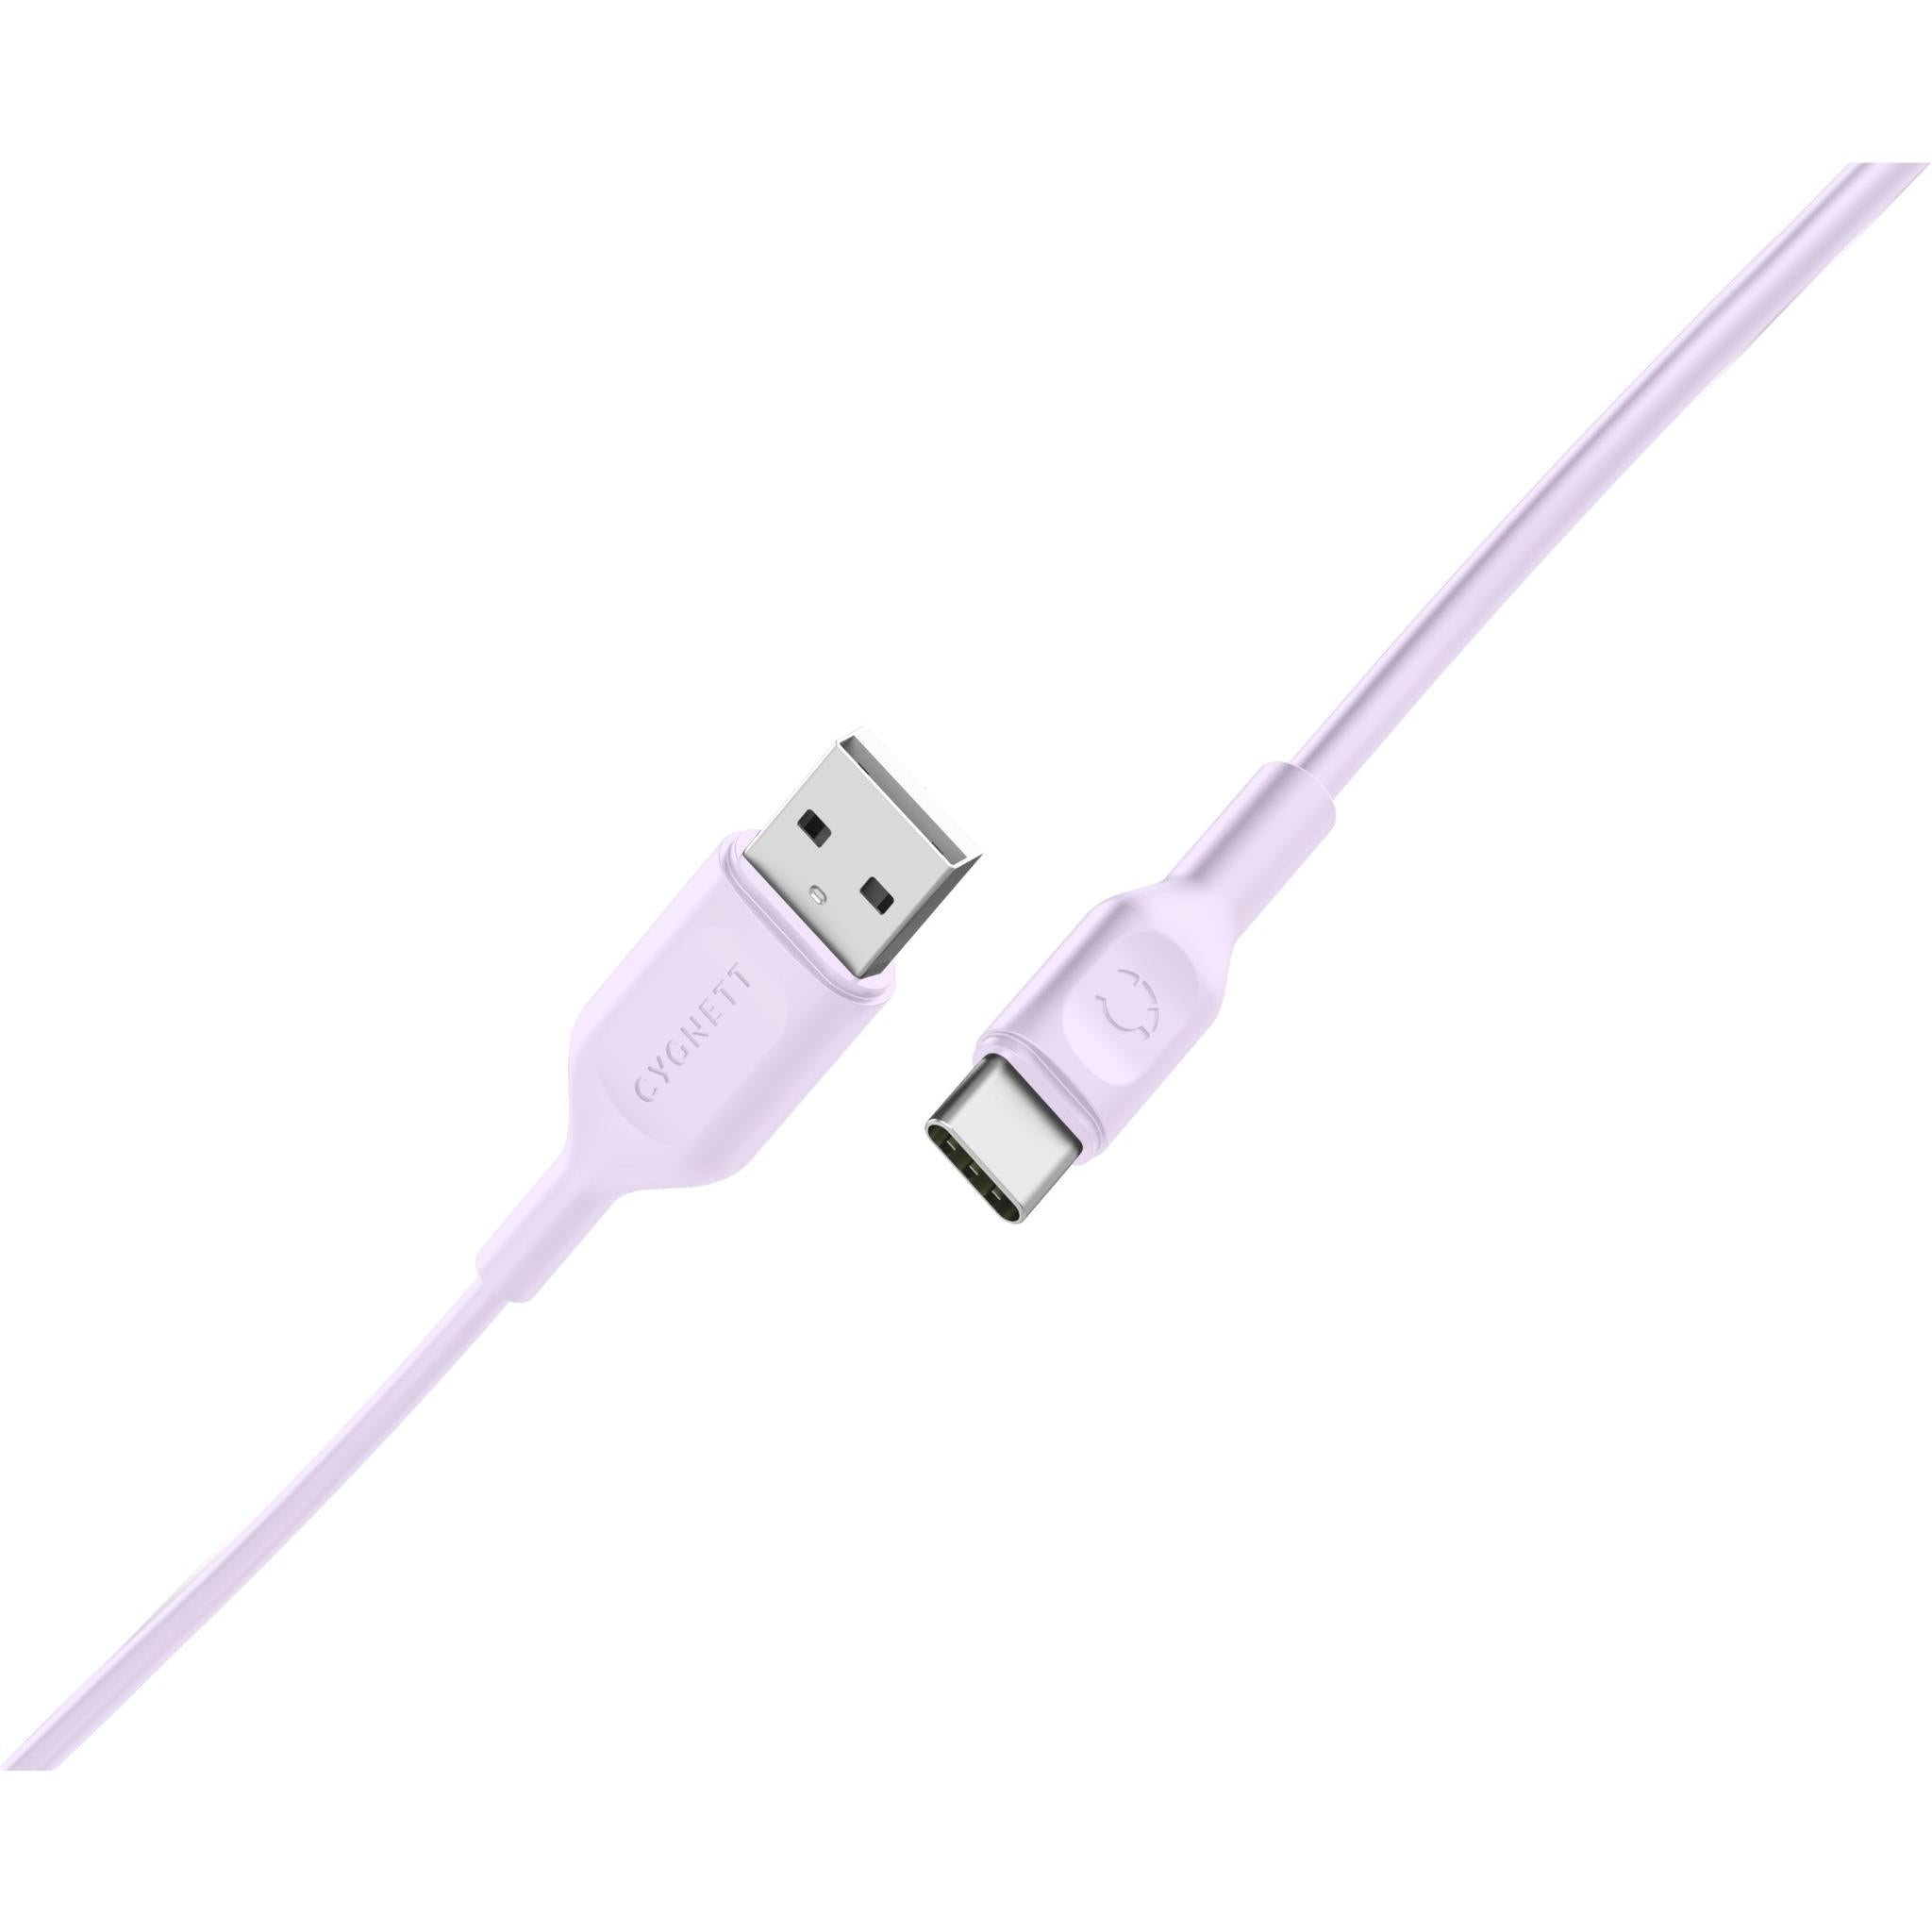 cygnett charge and connect usb-c to usb-a cable 1.2m (light violet)